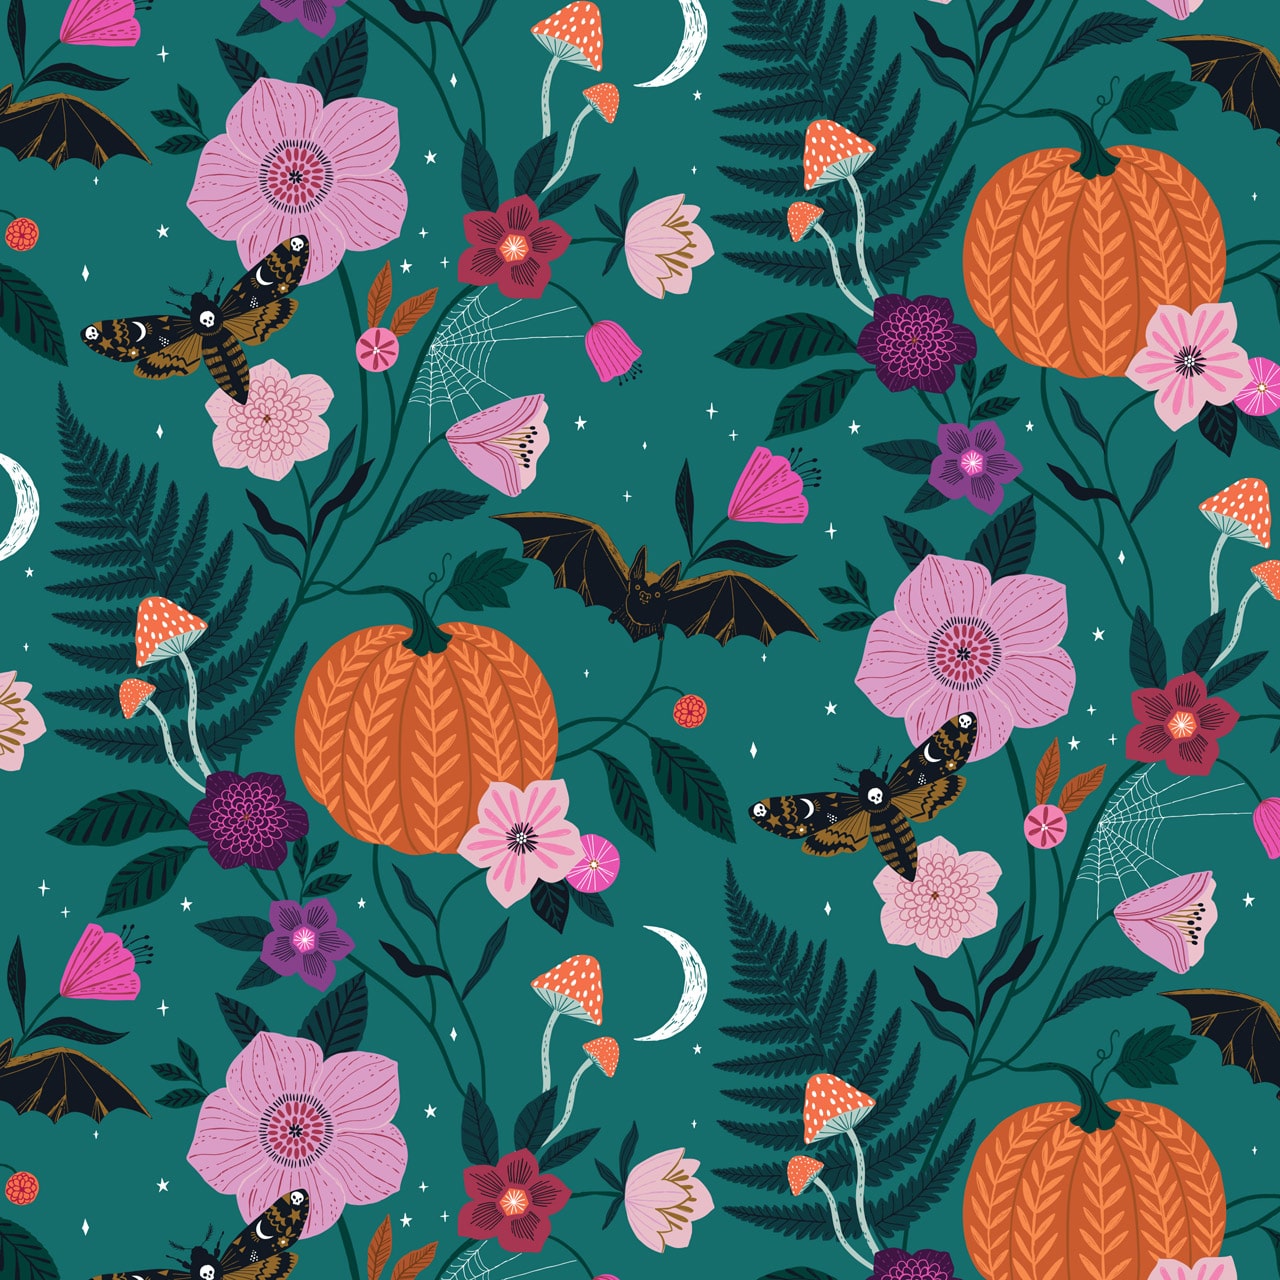 Bats and spiders cotton fabric - Twilight by Dashwood Studio